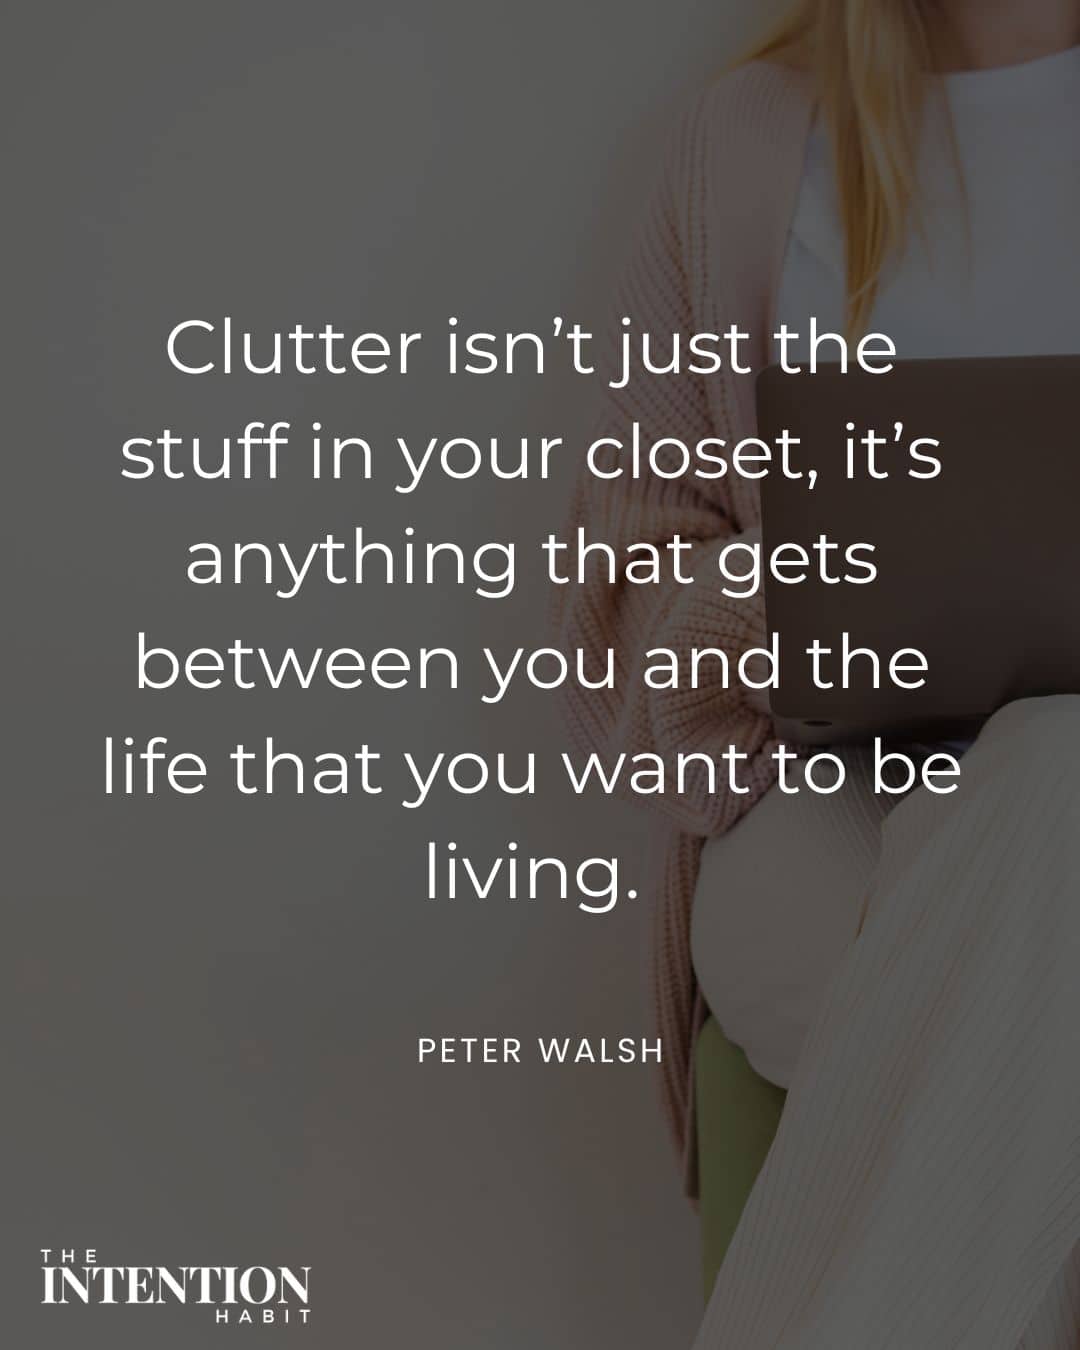 clutter isn't just the stuff in your closet. It's anything that gets between you and the life that you want to be living